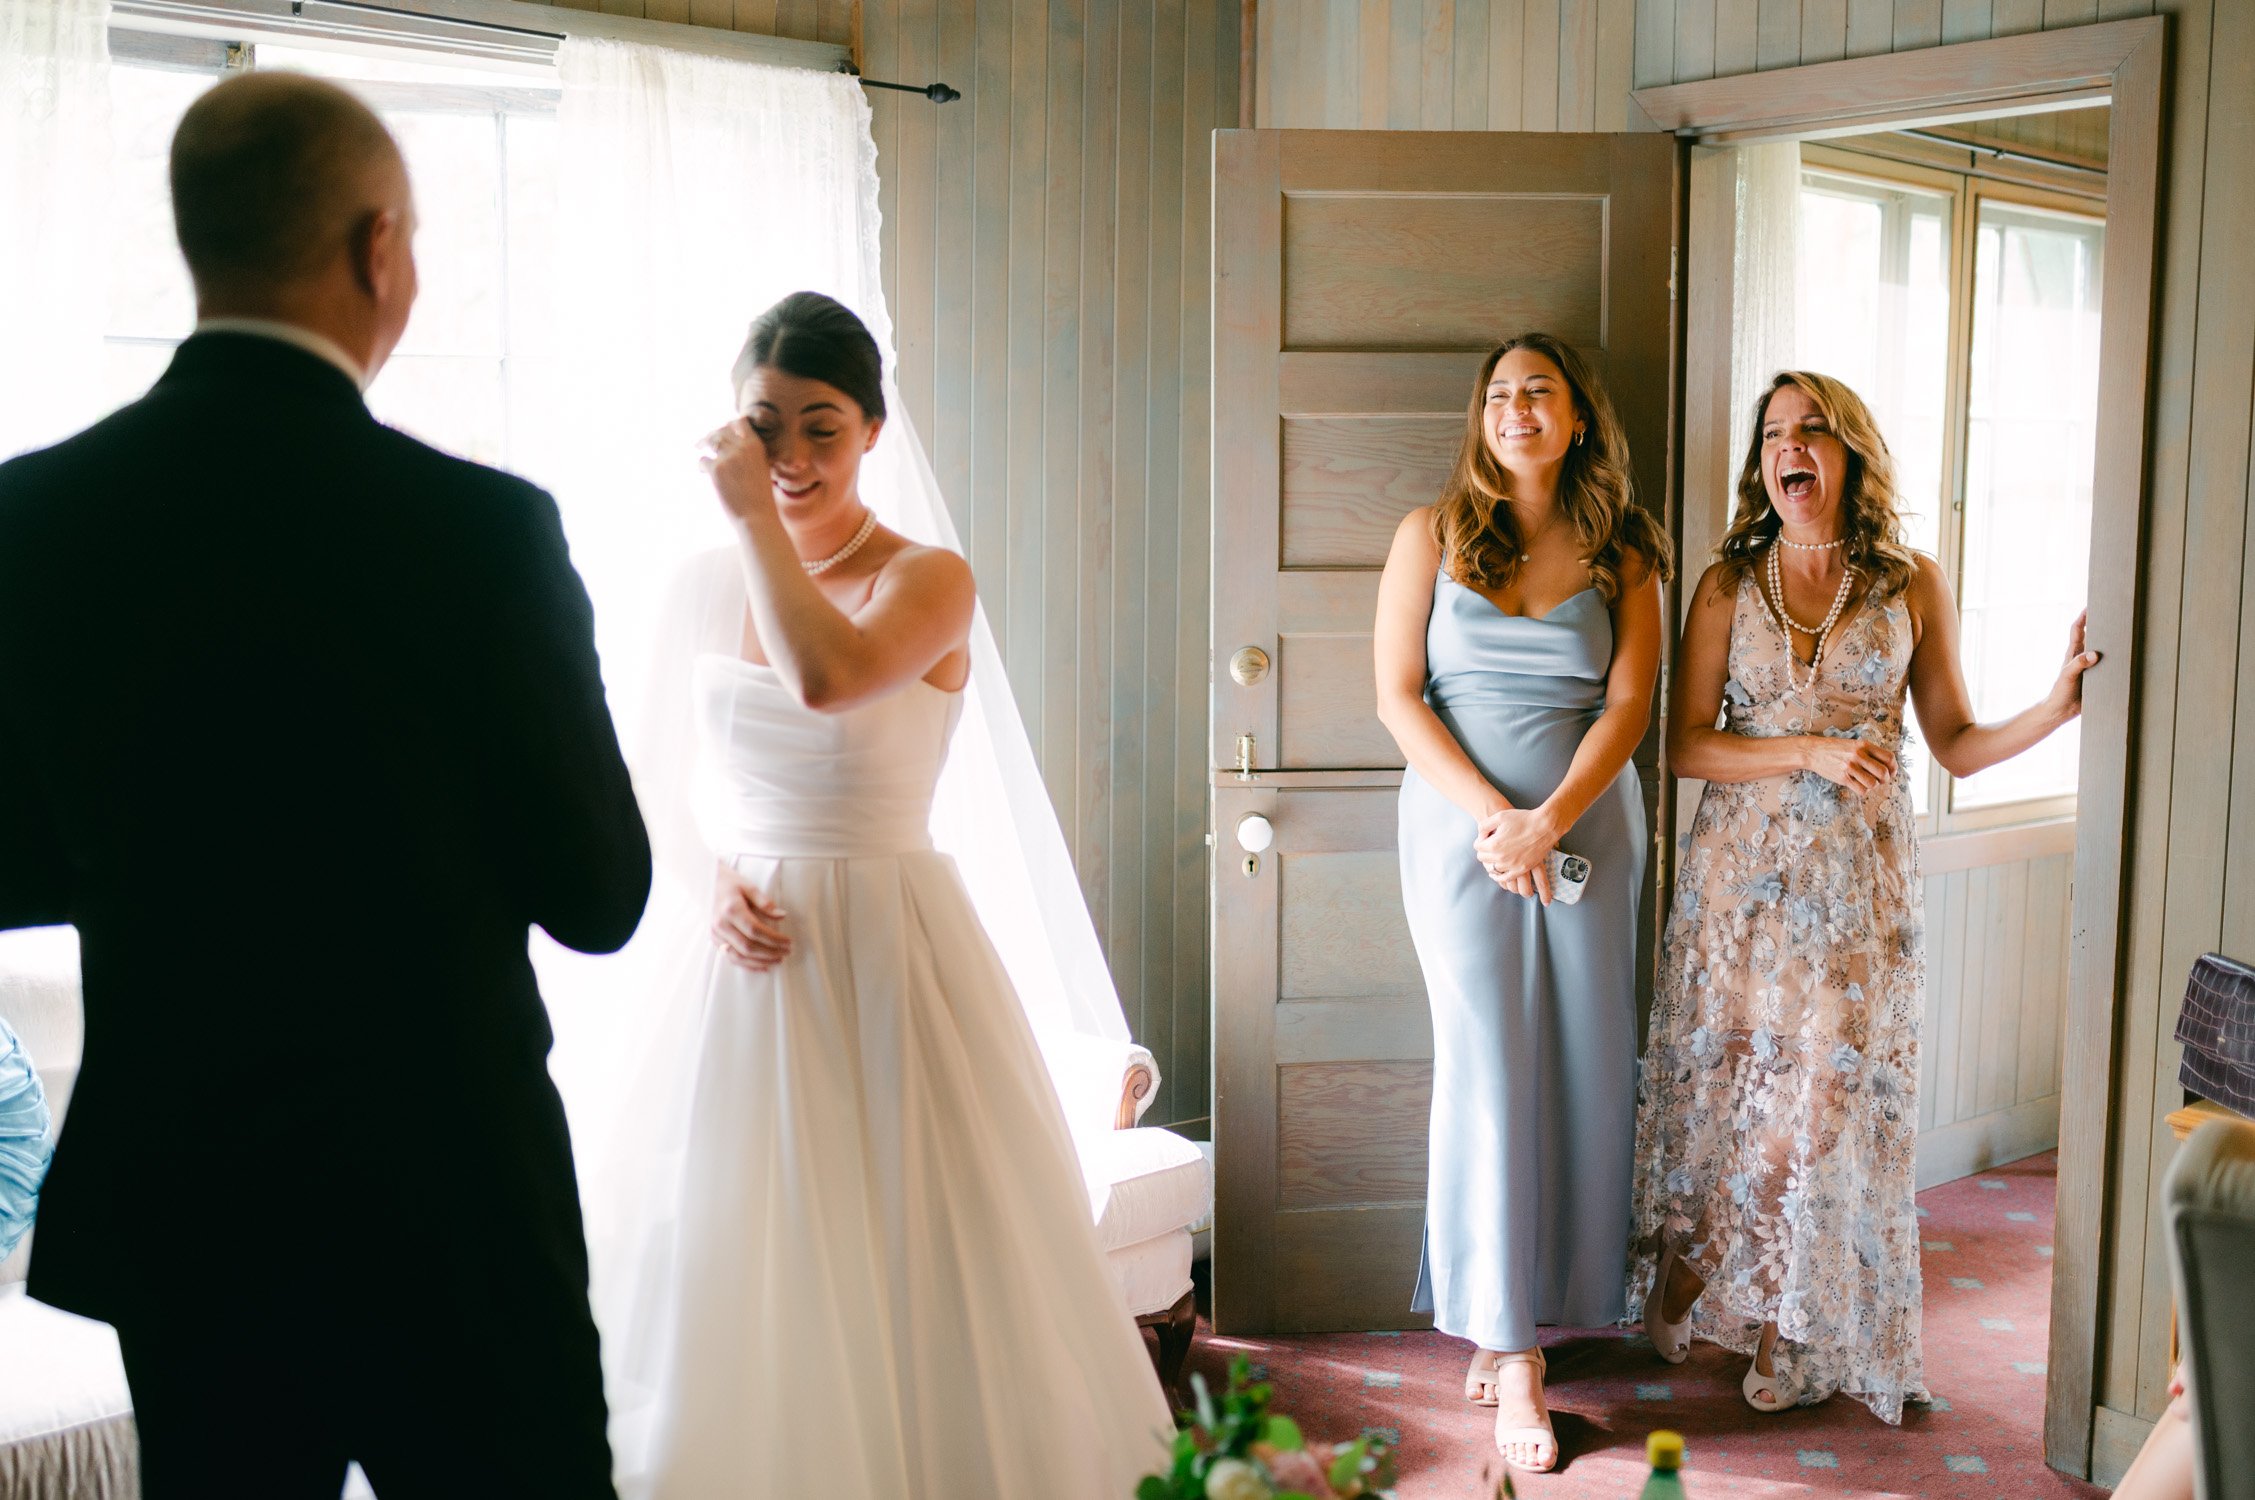 Valhalla Lake Tahoe wedding, photo of the bride's emotional first look with her father